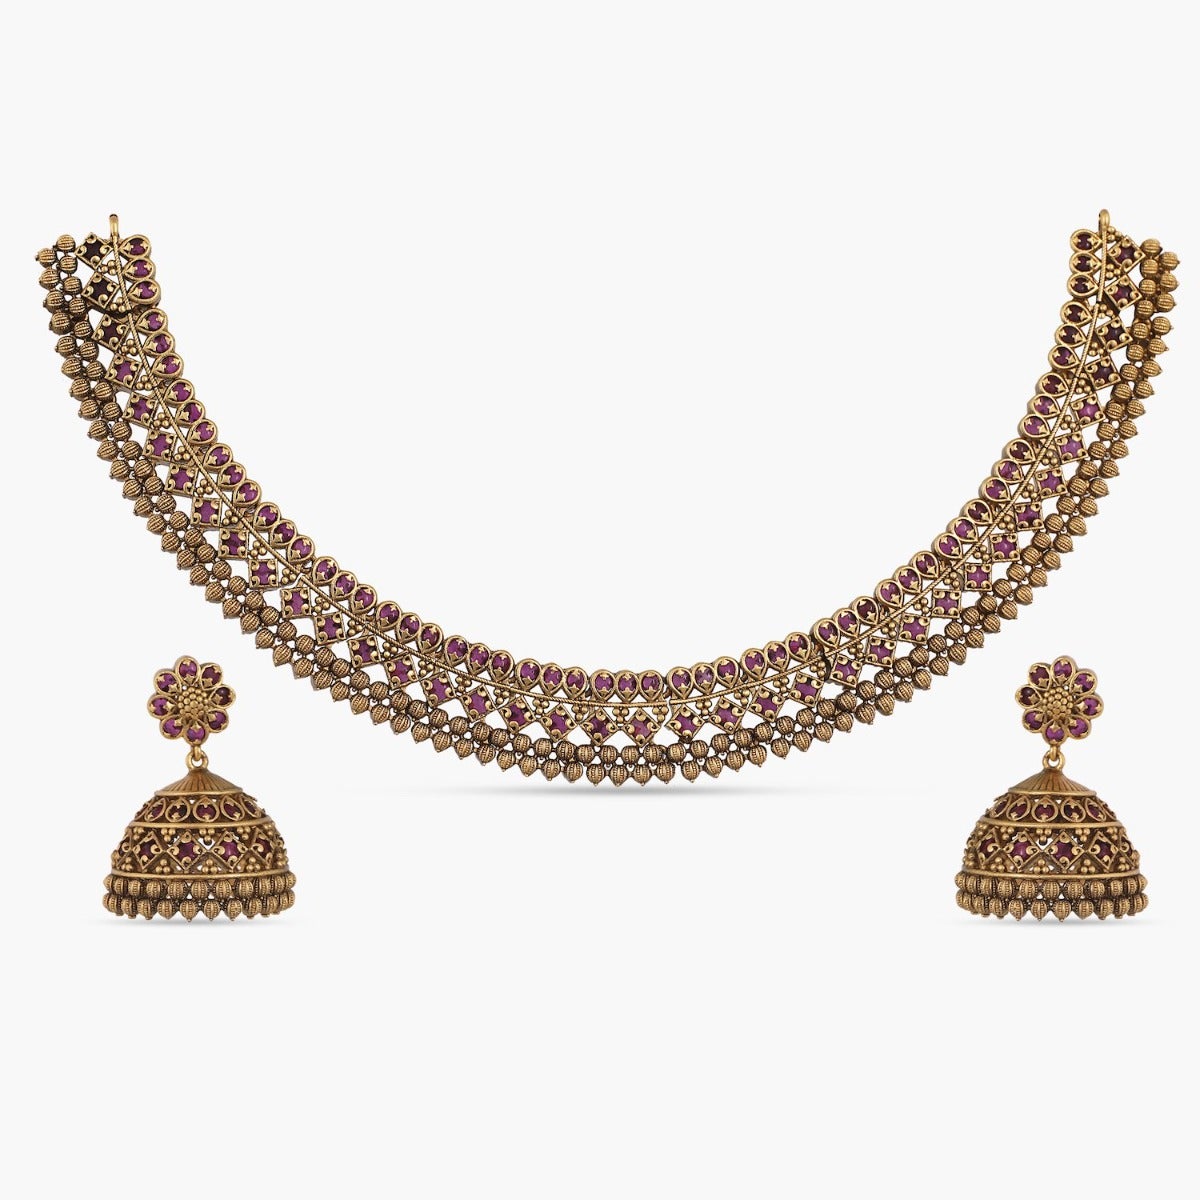 A picture of Indian artificial jewelry: an antique gold-colored necklace and earring set with red gemstones.